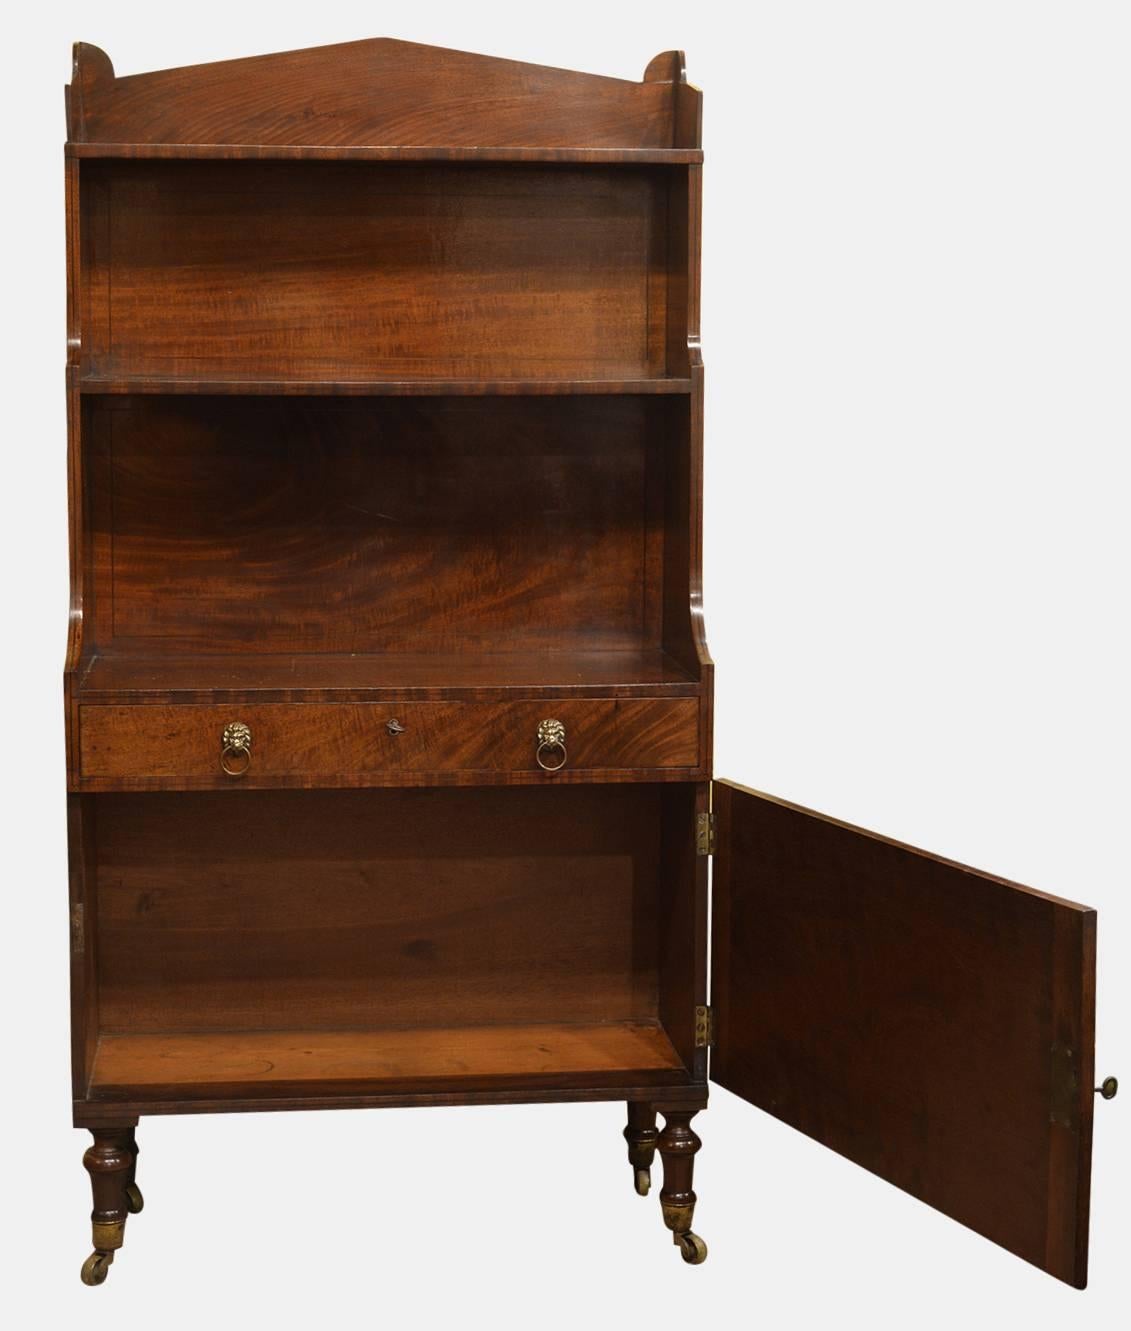 George III Sheraton Period Mahogany Waterfall Bookcase In Excellent Condition For Sale In Salisbury, GB